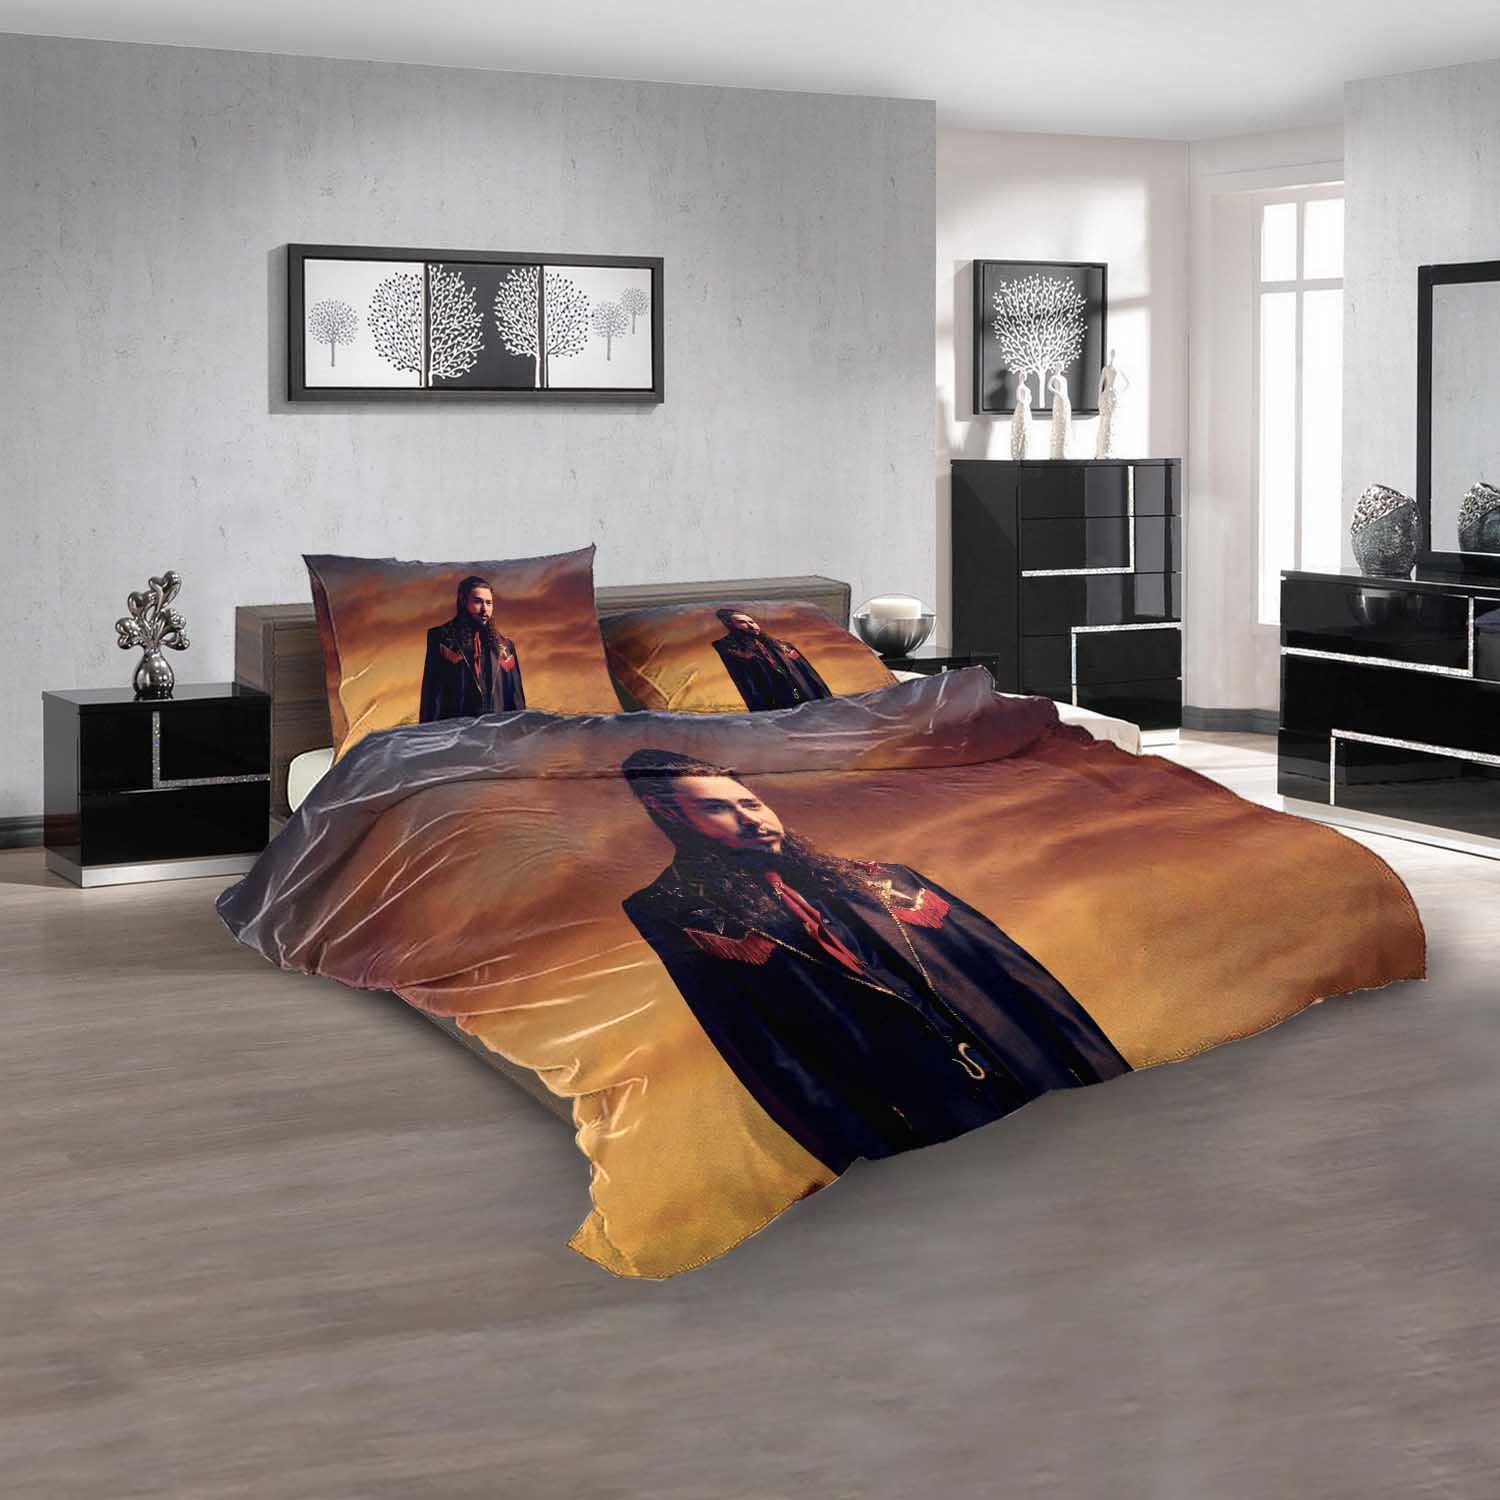 Famous Rapper Post Malone N Bedding Sets